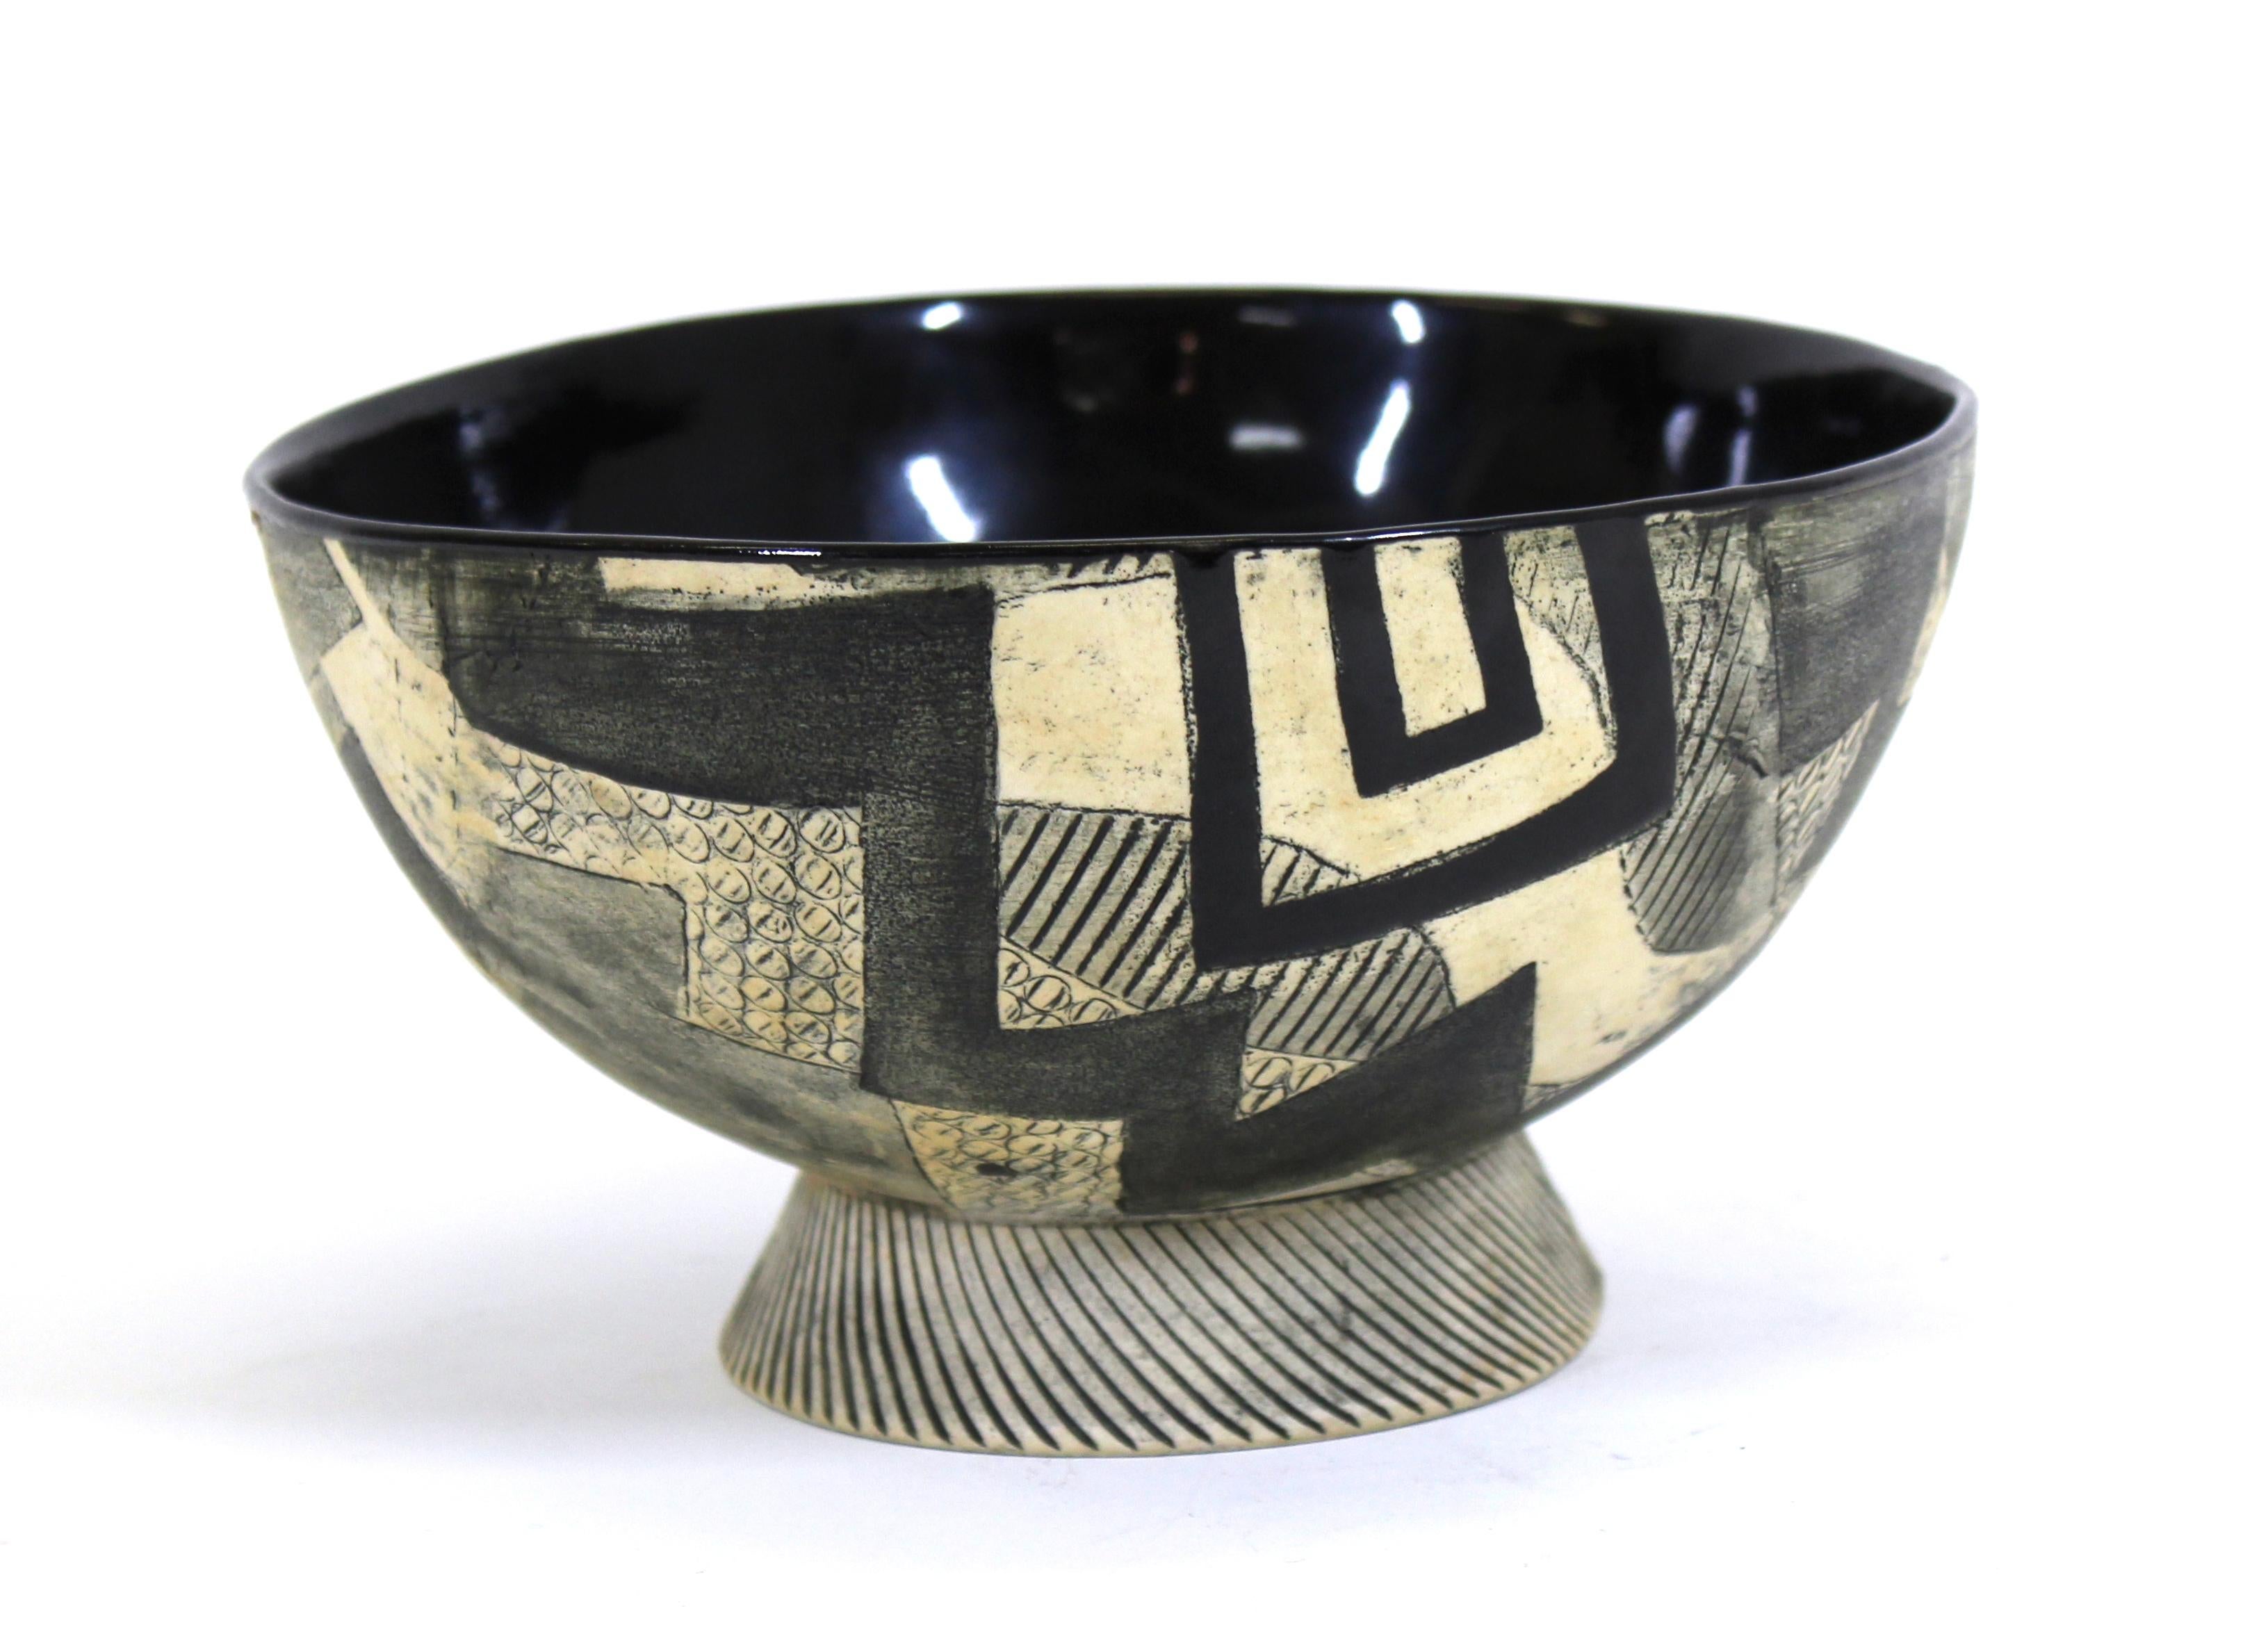 Postmodern art studio ceramic bowl with bold geometric pattern, stamped 'Ash' and dated 1989 on bottom.